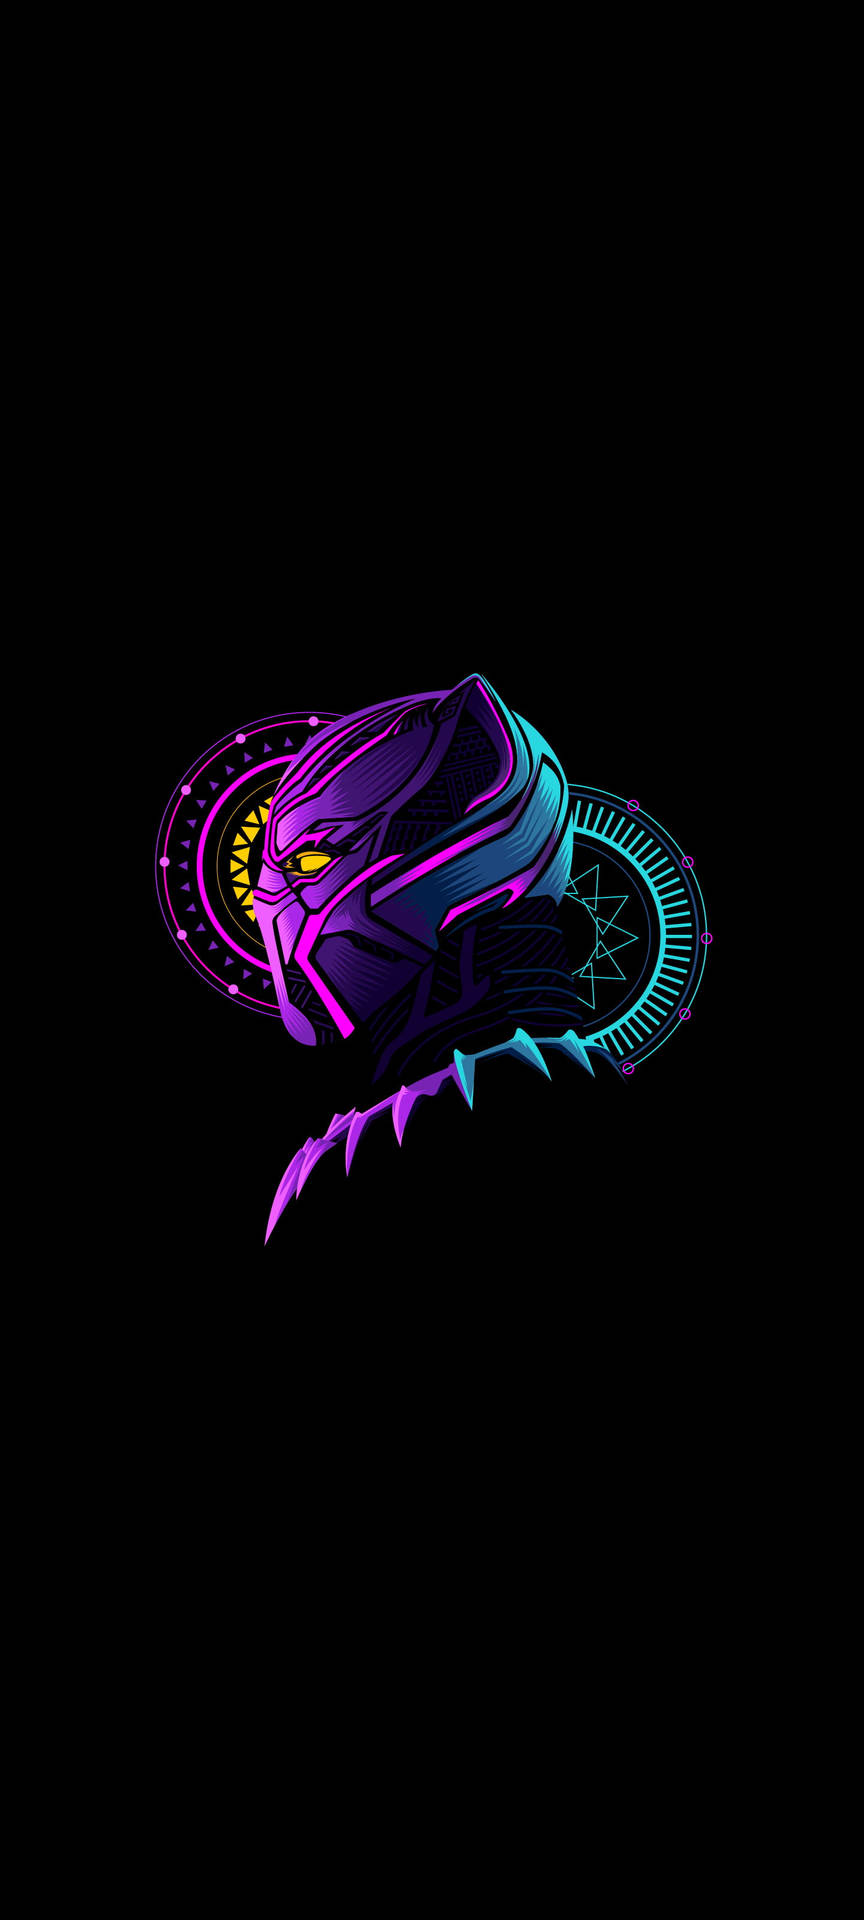 Neon Gradient Sort Panther Android Wallpaper